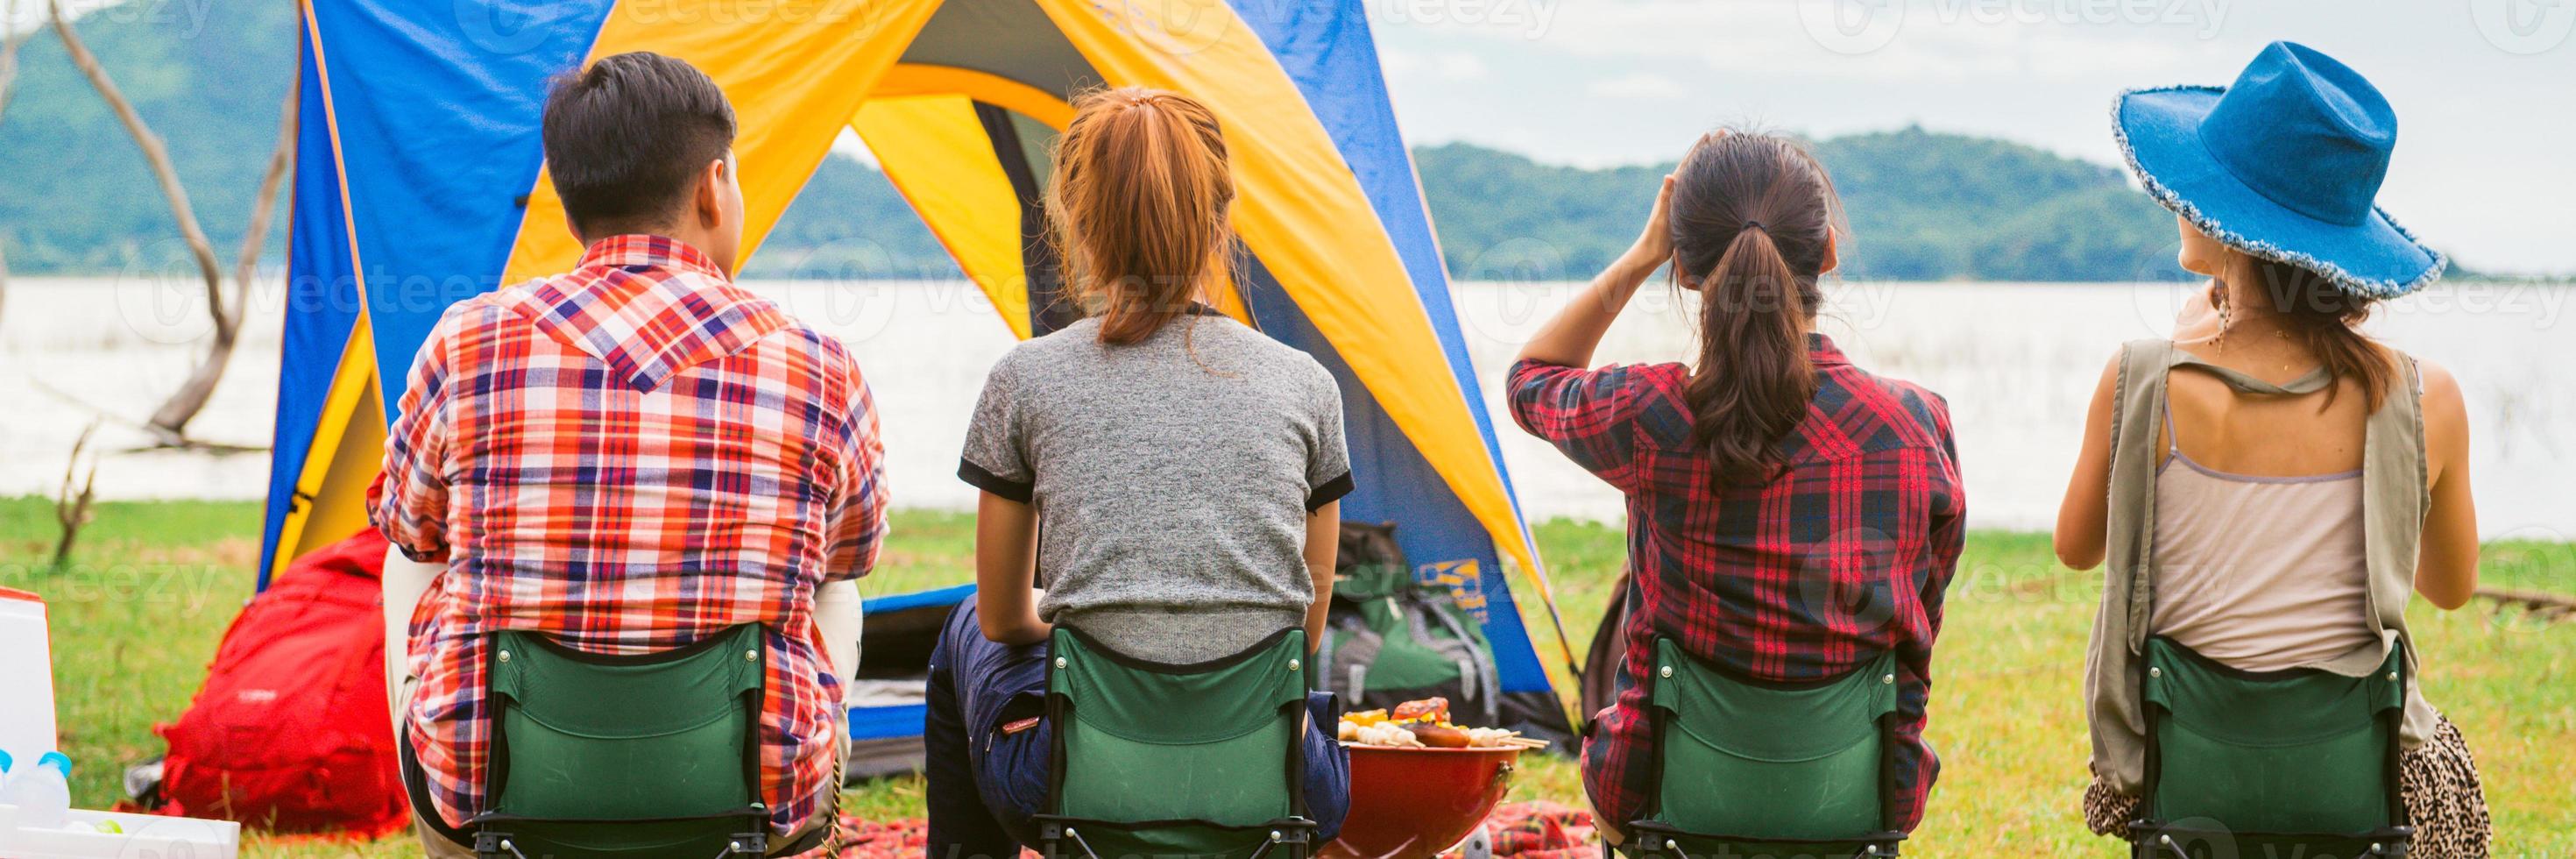 Group of man and woman enjoy camping picnic and barbecue at lake with tents in background. Young mixed race Asian woman and man. Panoramic banner. photo